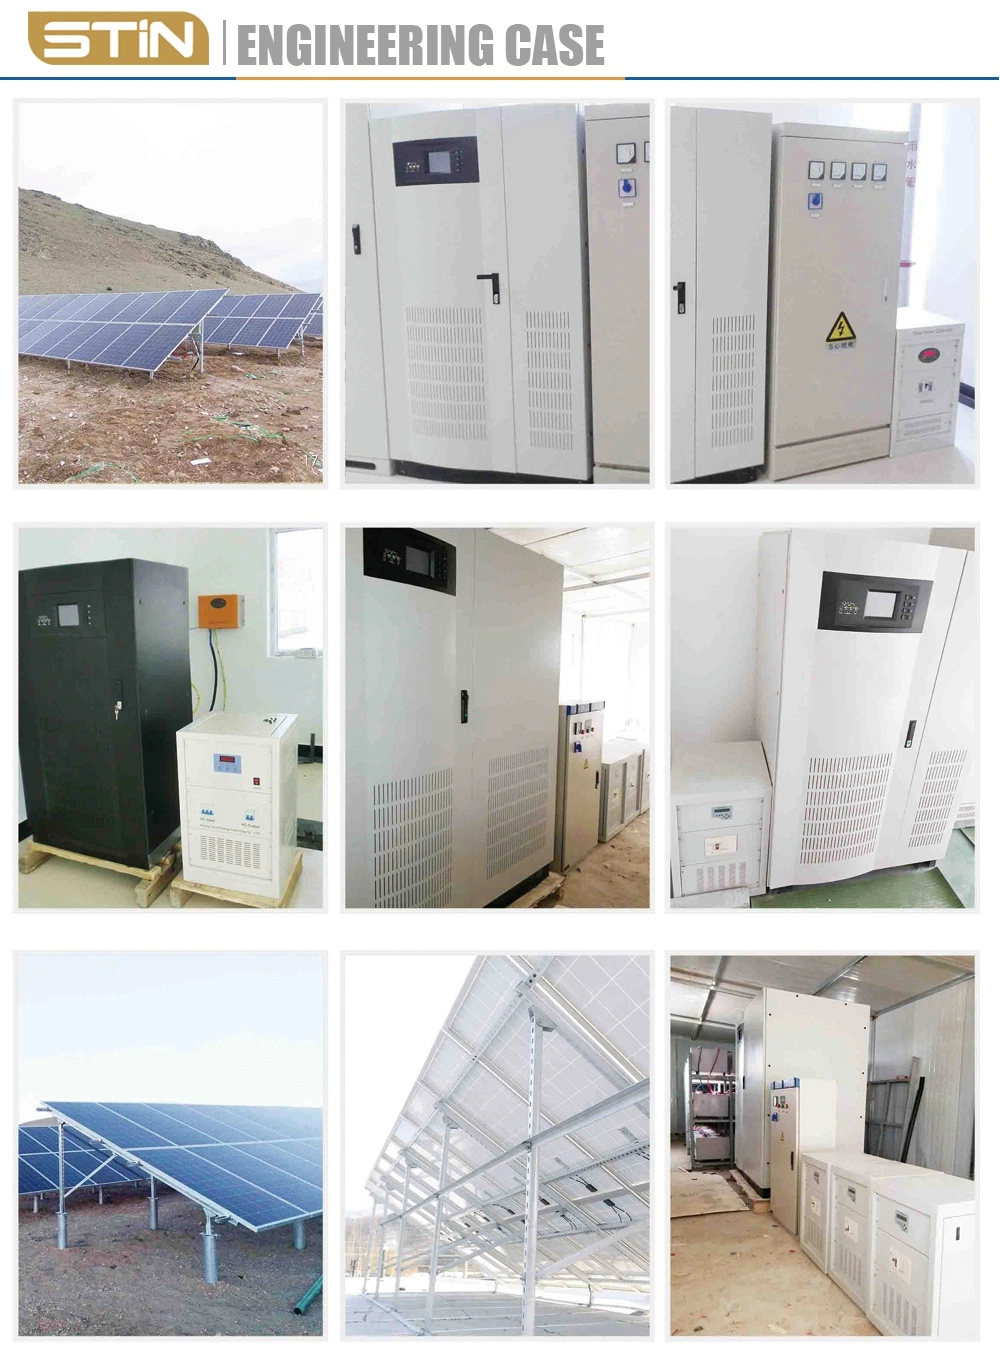 off-Grid10kw 20kw 30kw 50kw 60kw 80kw 100kw Renewable Solar Module Photovoltaic Energy Power Panel Systems for Home Electricity Use with Good Price